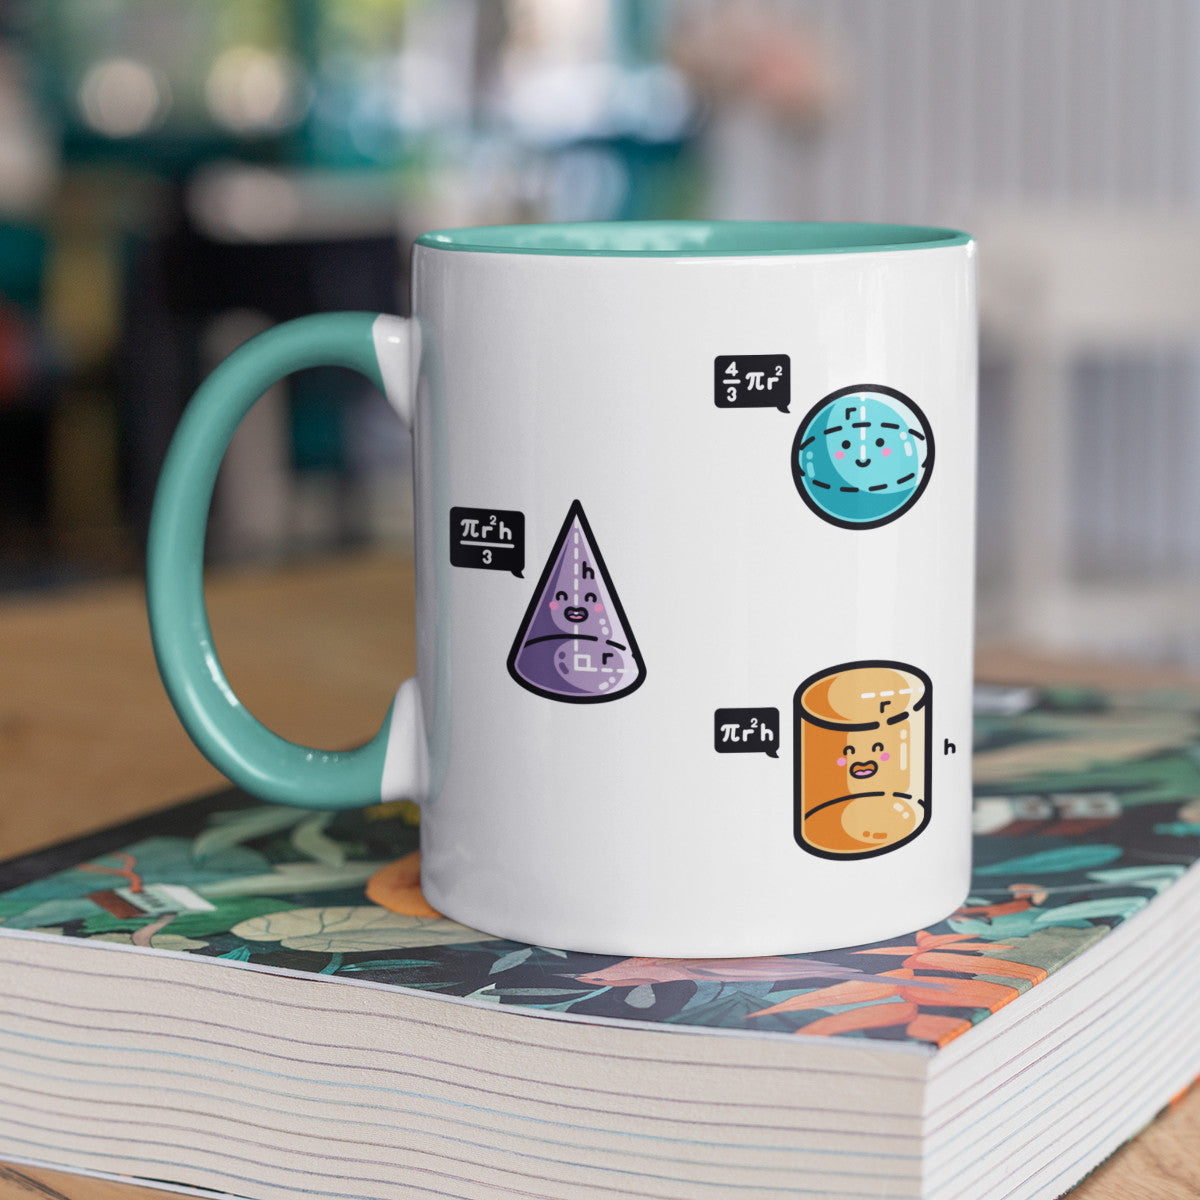 A two toned white and spearmint ceramic mug with the handle to the left showing three colourful 3D shapes with faces and speech bubbles stating the equation for working out their volume